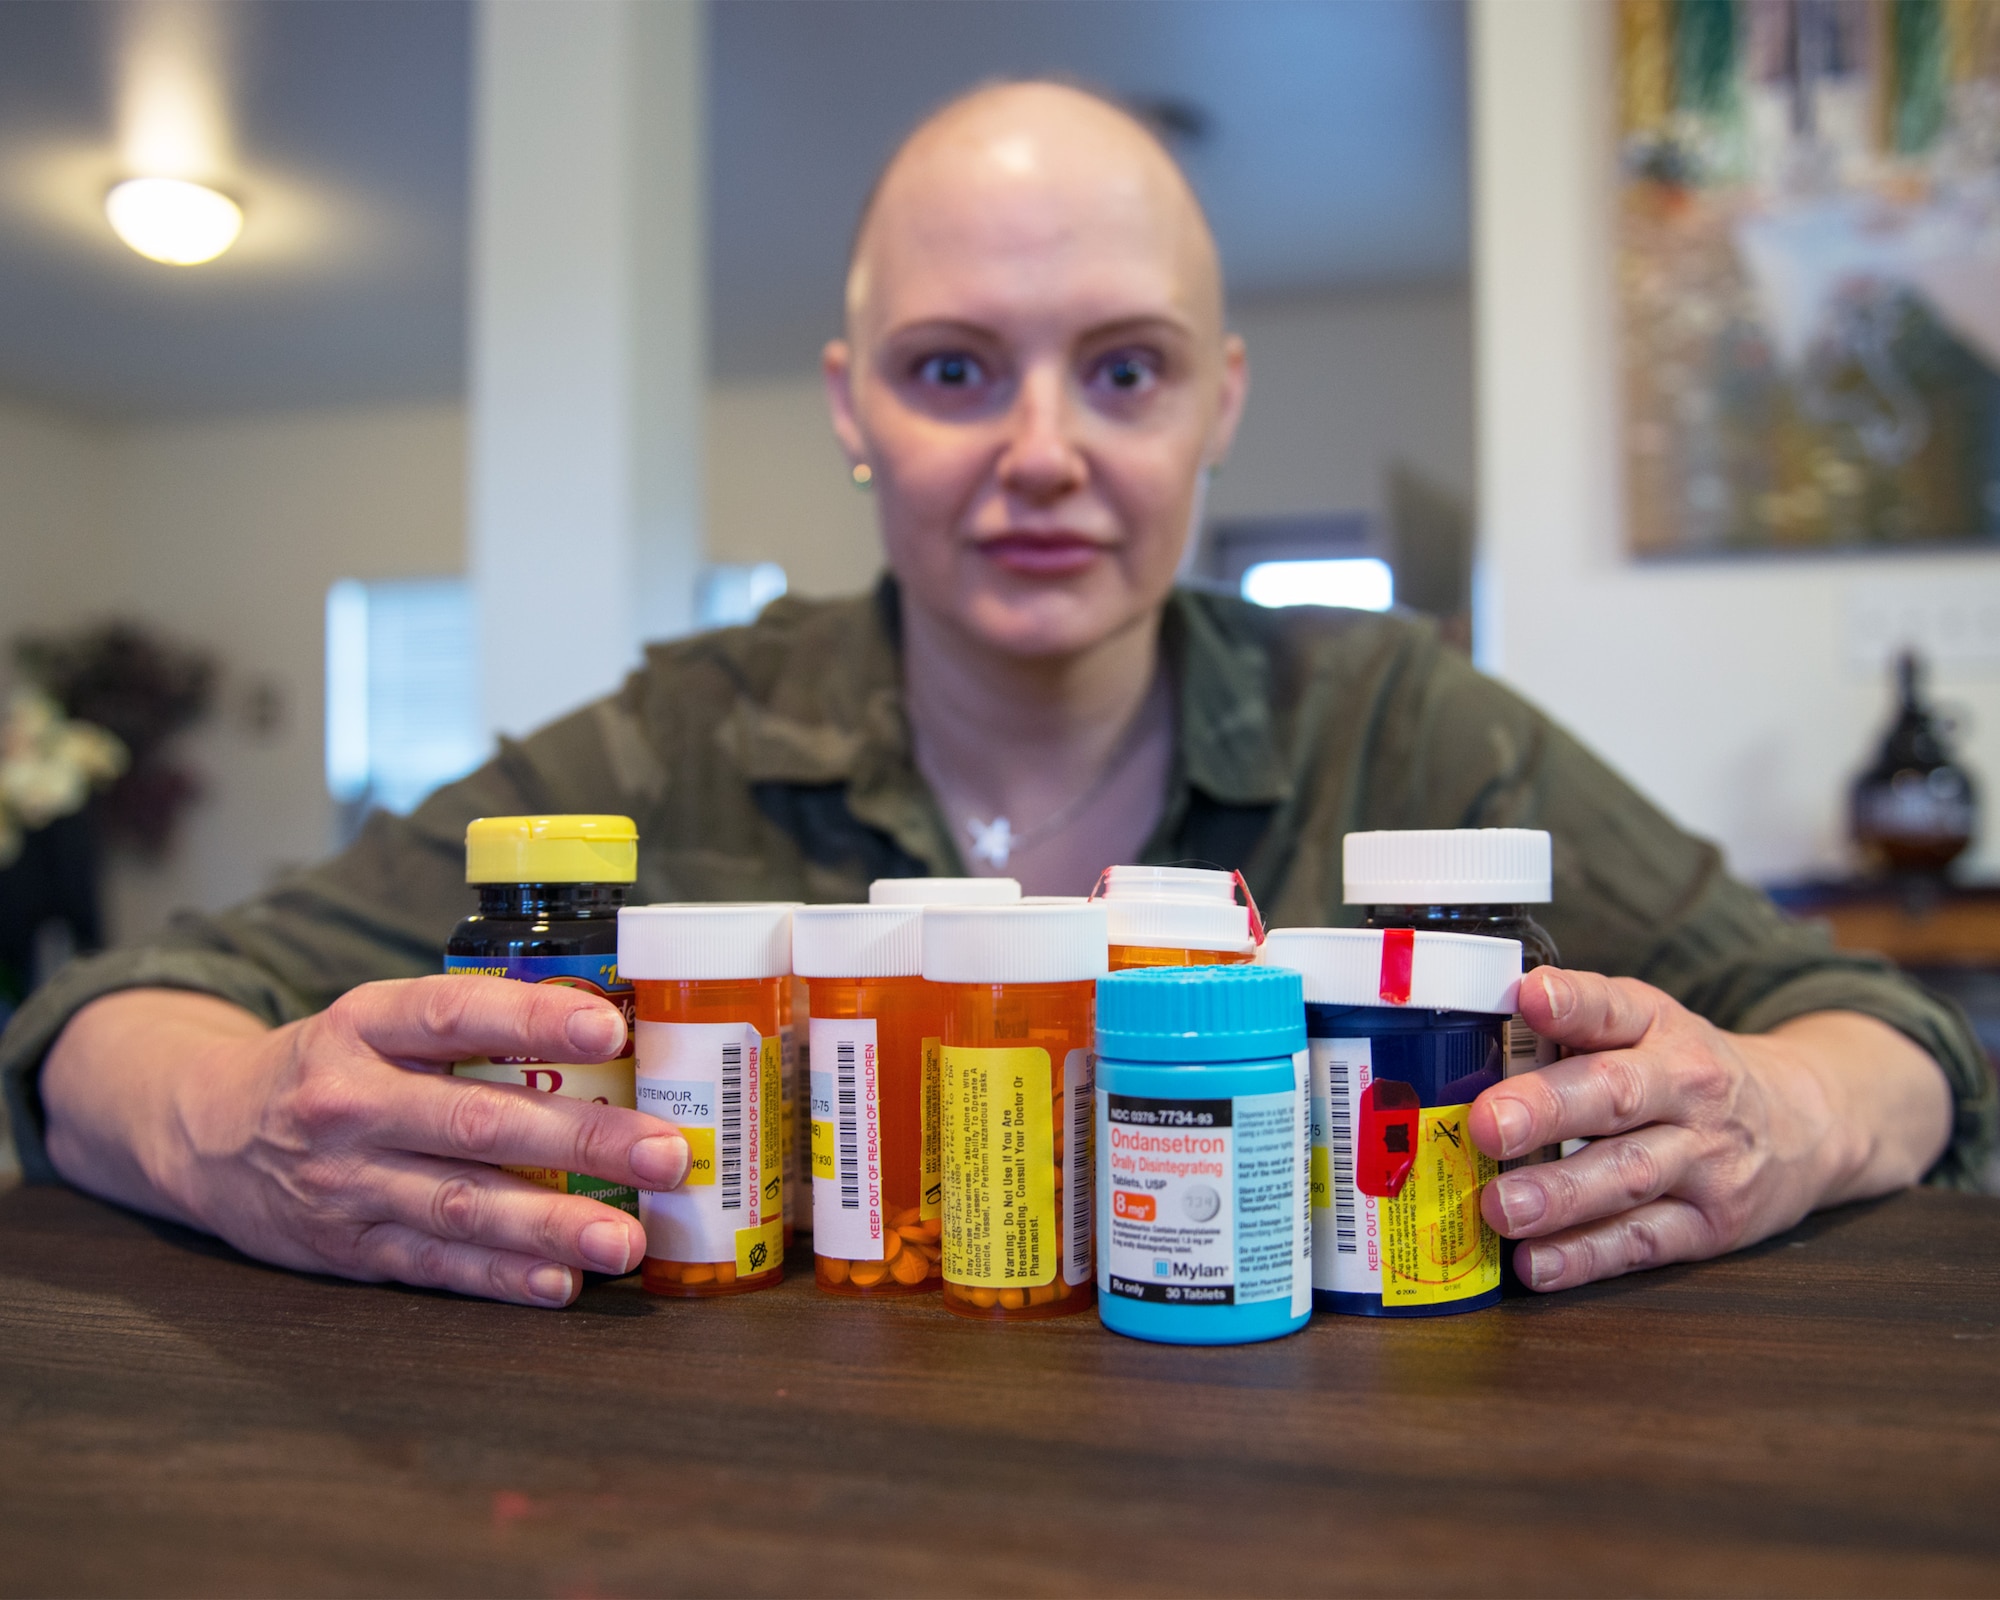 U.S. Air Force Master Sgt. Tracey Drake, 60th Medical Operations Squadron poses with her required medications, Travis Air Force Base, Calif., Jan. 10, 2017. Drake was diagnosed with metastatic breast cancer during her retirement physical in July 2016, 3 weeks before starting terminal leave. Drake faces surgery, radiation, targeted infusion, and reconstruction surgery. (U.S. Air Force photo/Louis Briscese)